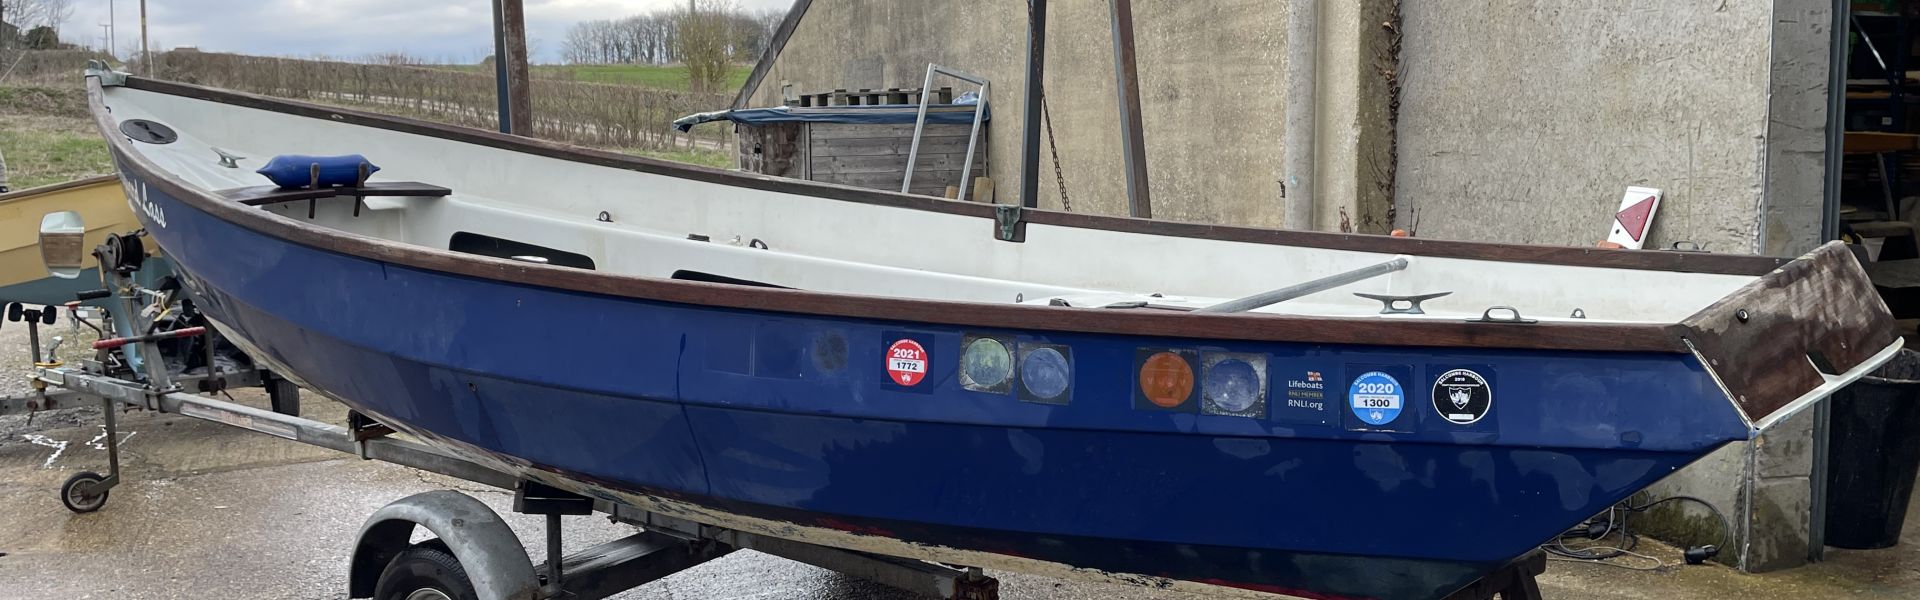 Drascombe Lugger 1646 Year 1990